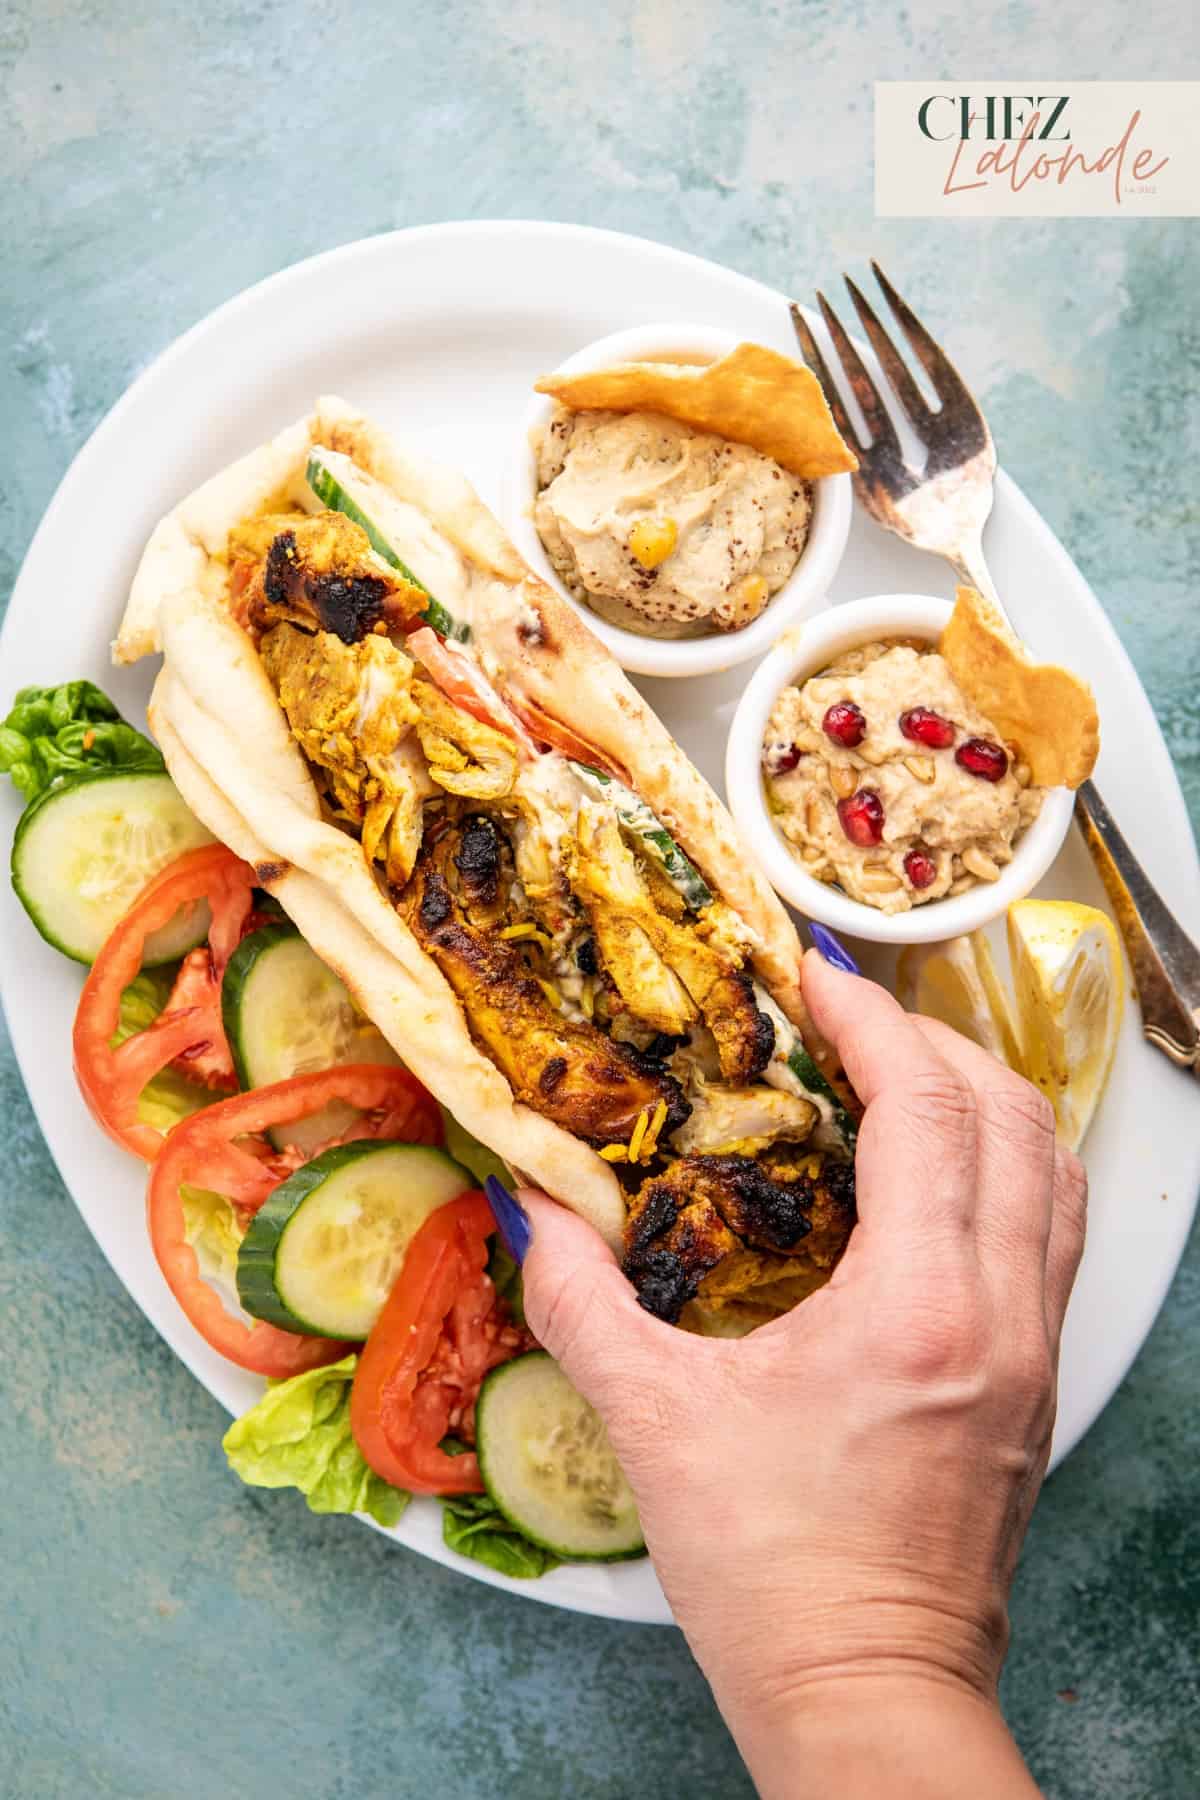 Air Fryer Chicken Shawarma served with a side of hummus, baba ganoush, and salad.